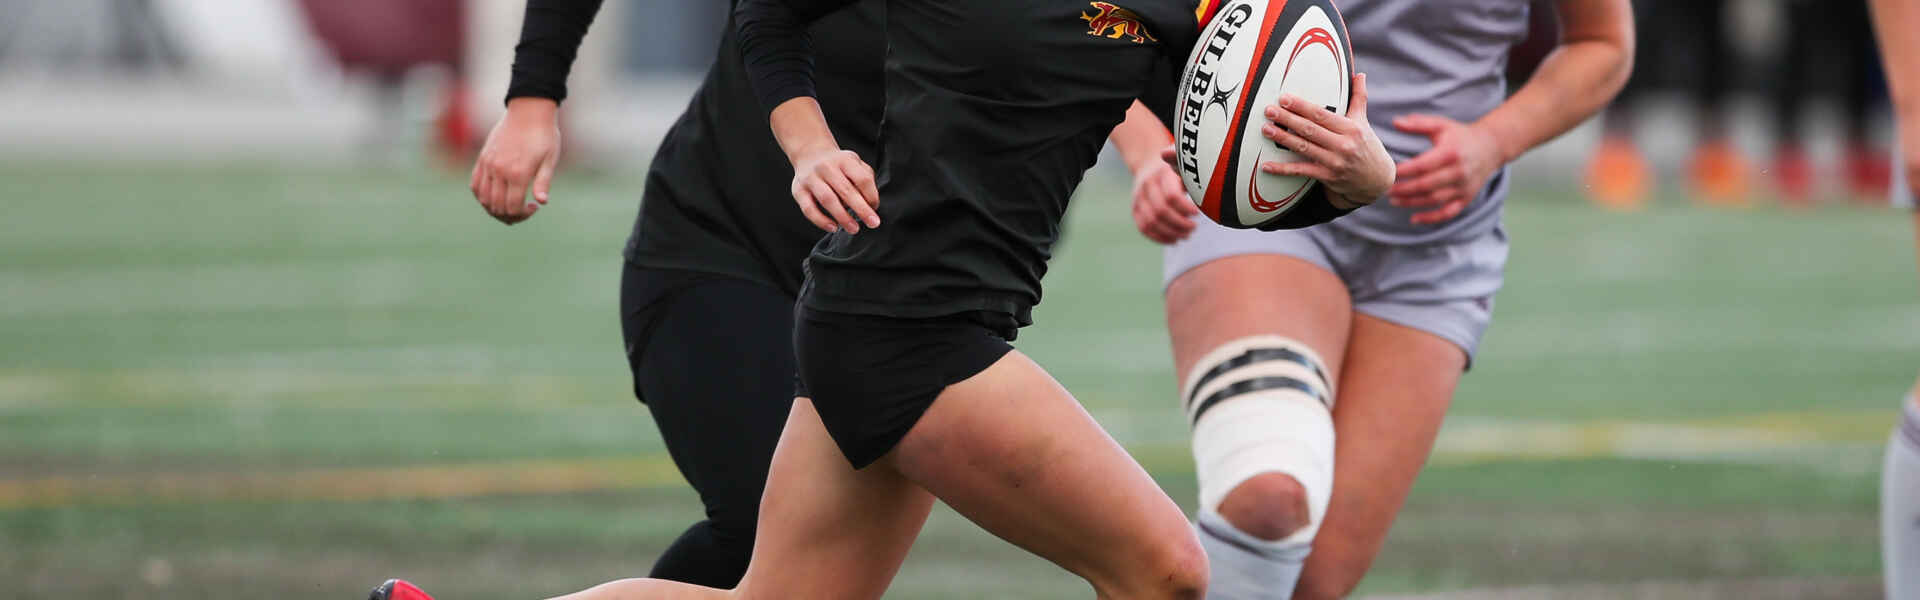 University of Guelph's Talia Hoffman sports a black uniform and holds a white, black, and red rugby ball during a game.